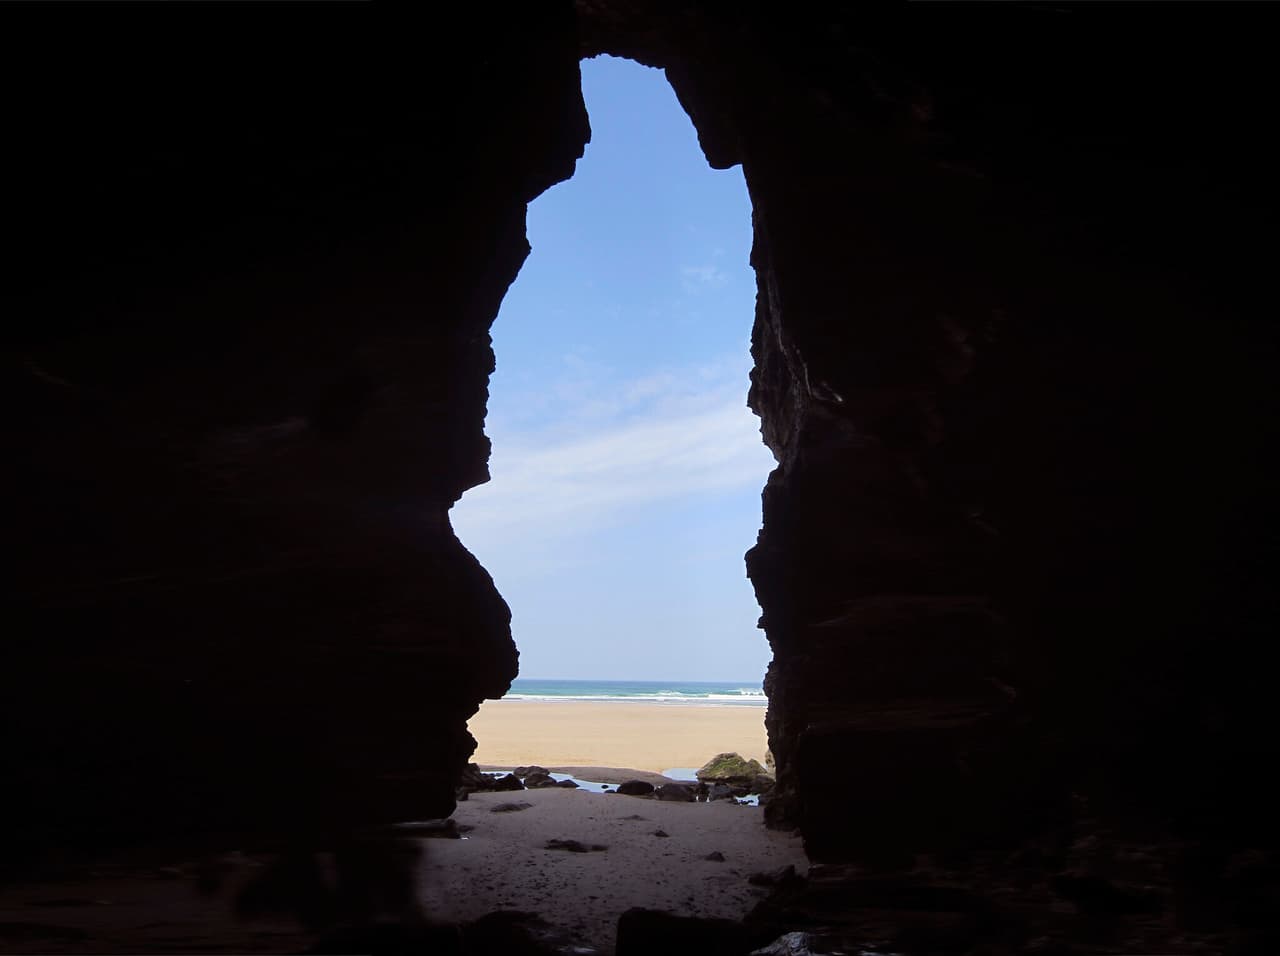 The mouth of a cave, showing the sky, sea and a beach beyond